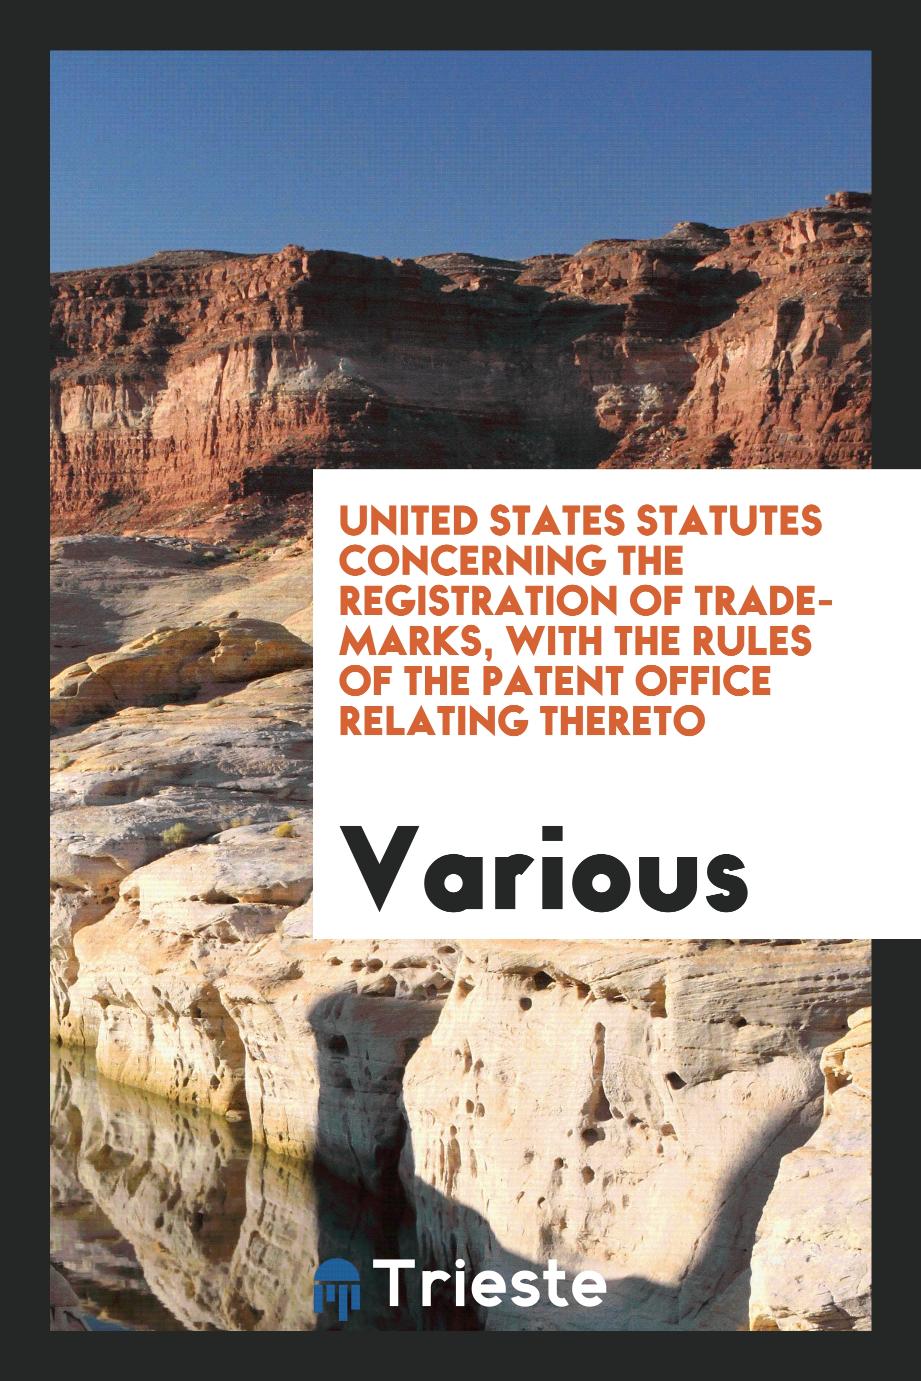 United States Statutes Concerning the Registration of Trade-Marks, with the rules of the patent office relating thereto